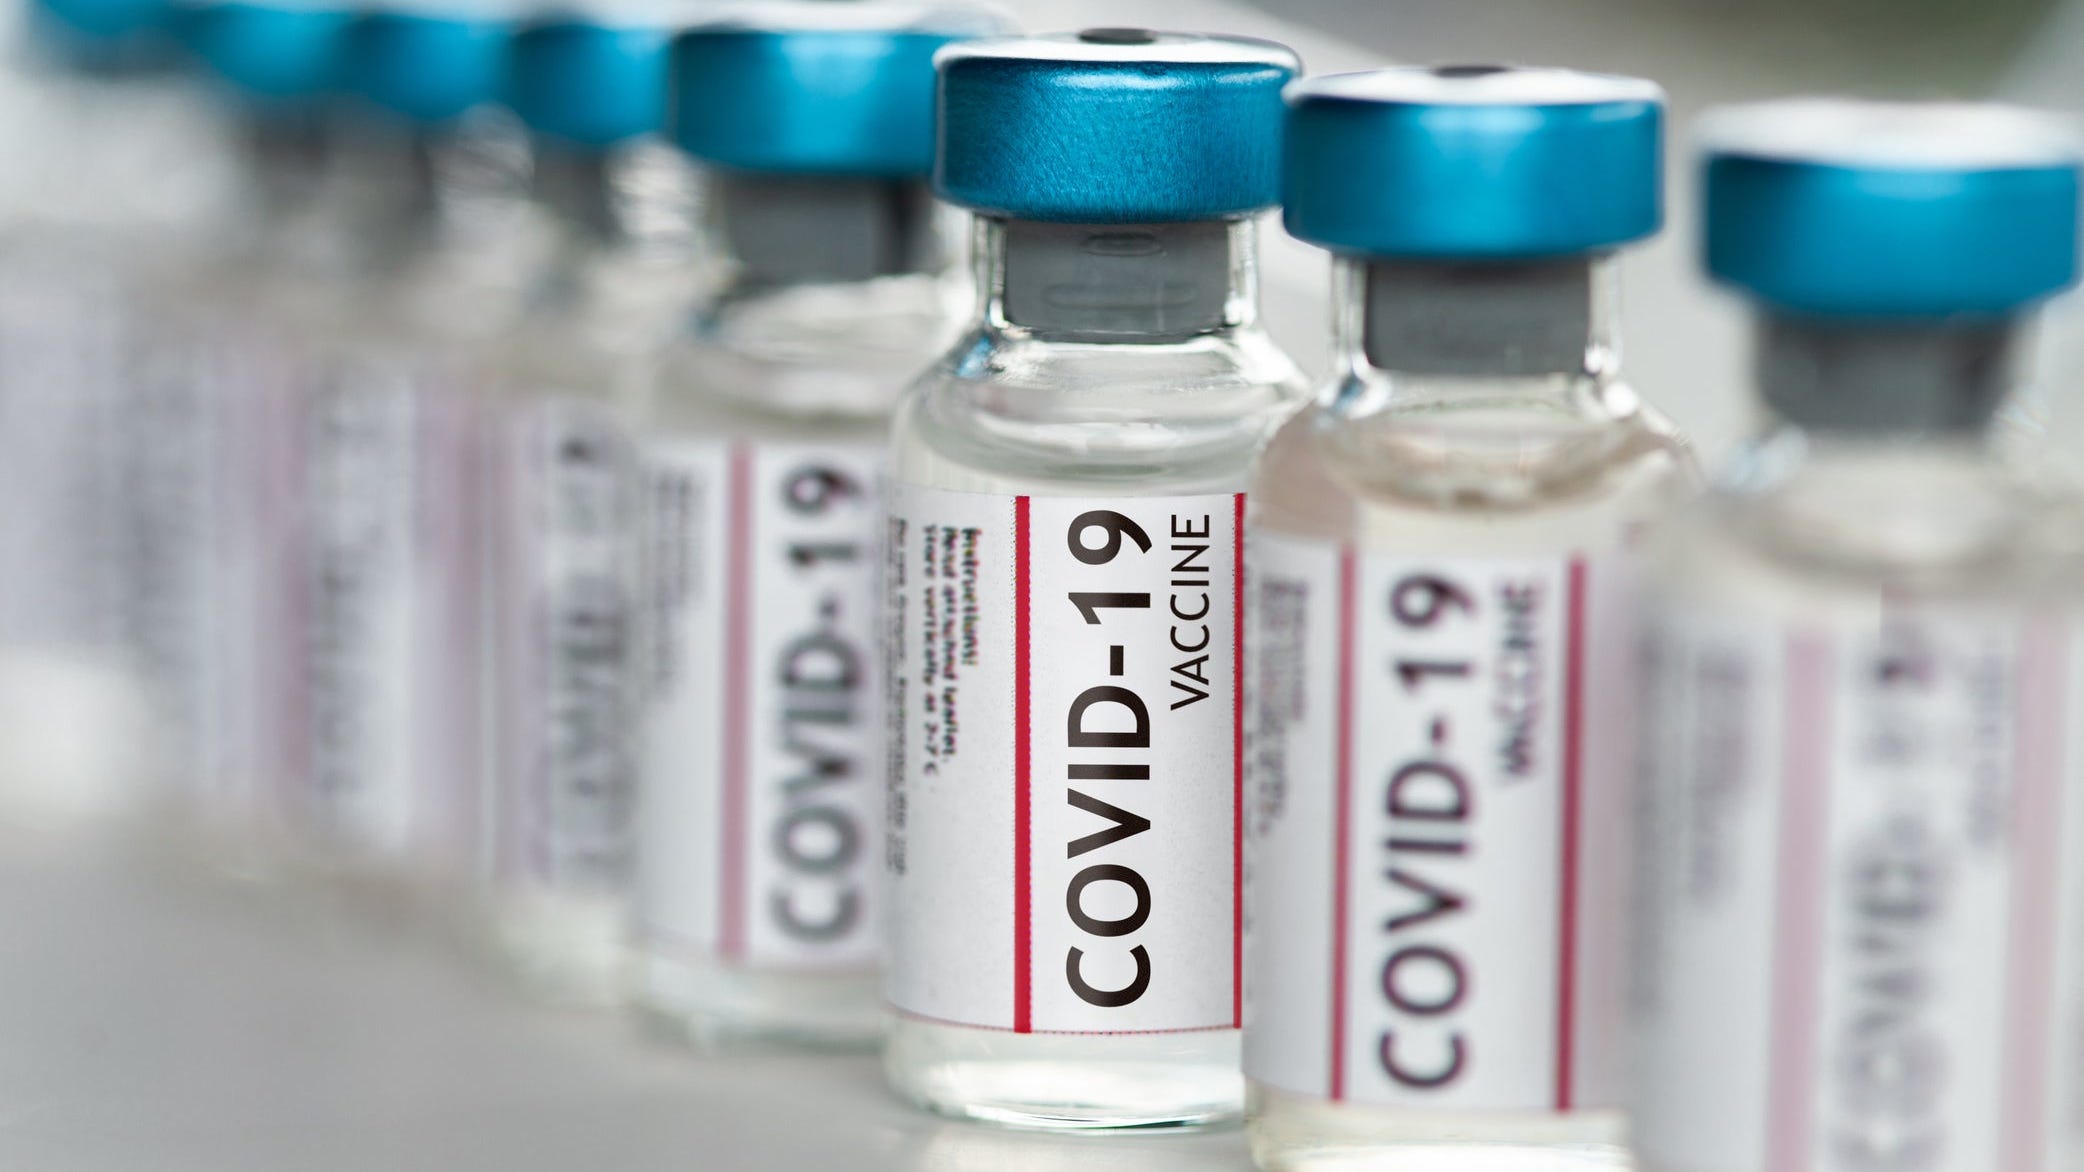 covid vaccine after effects duration